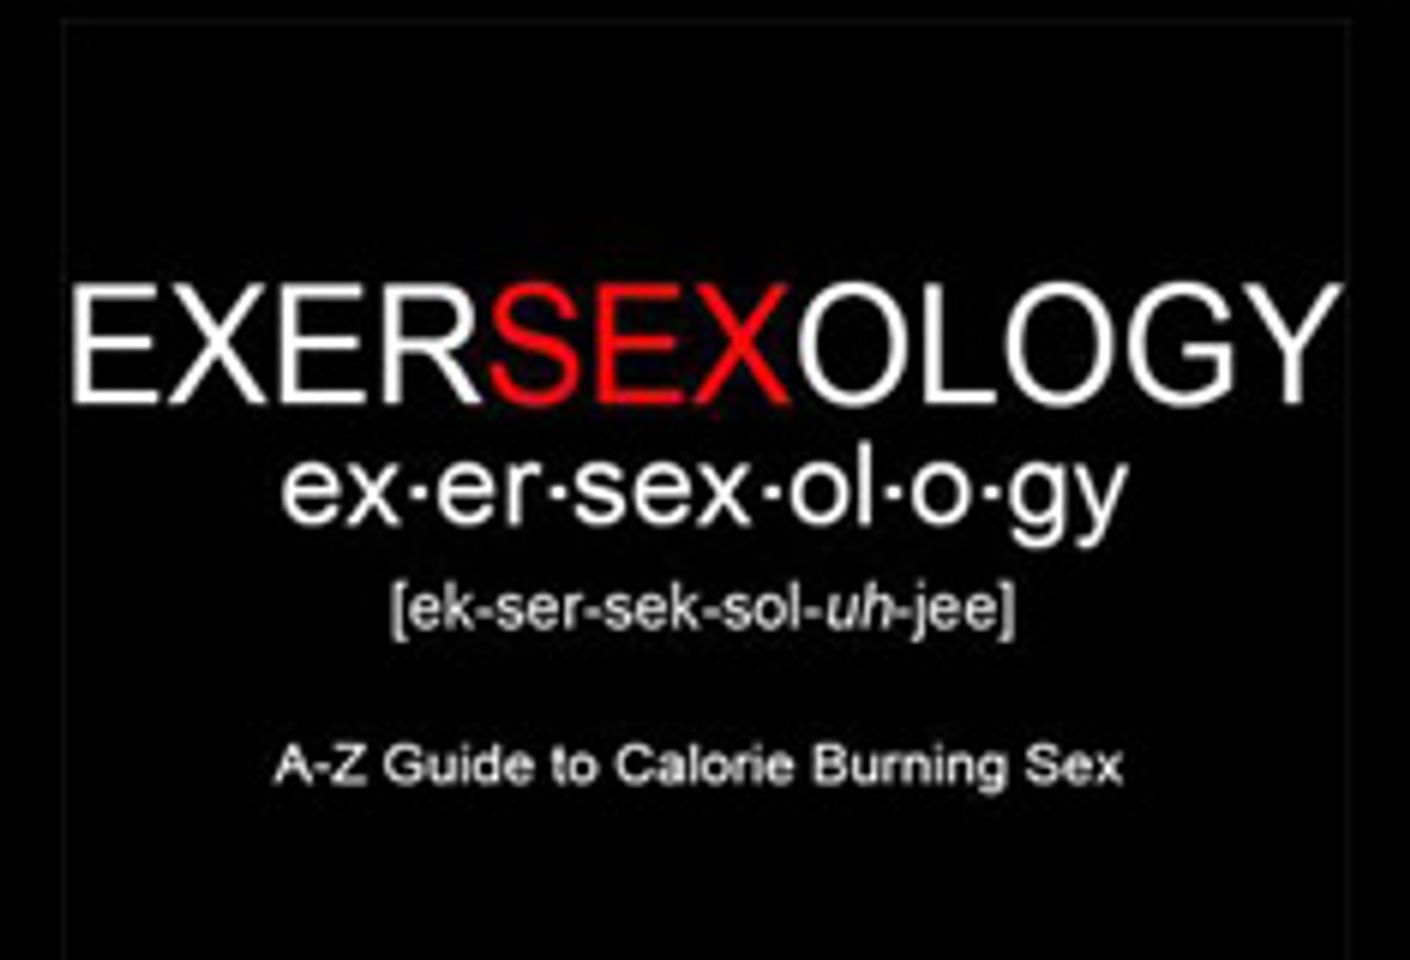 New Exersexology Book To Debut At AVN Adult Entertainment Expo